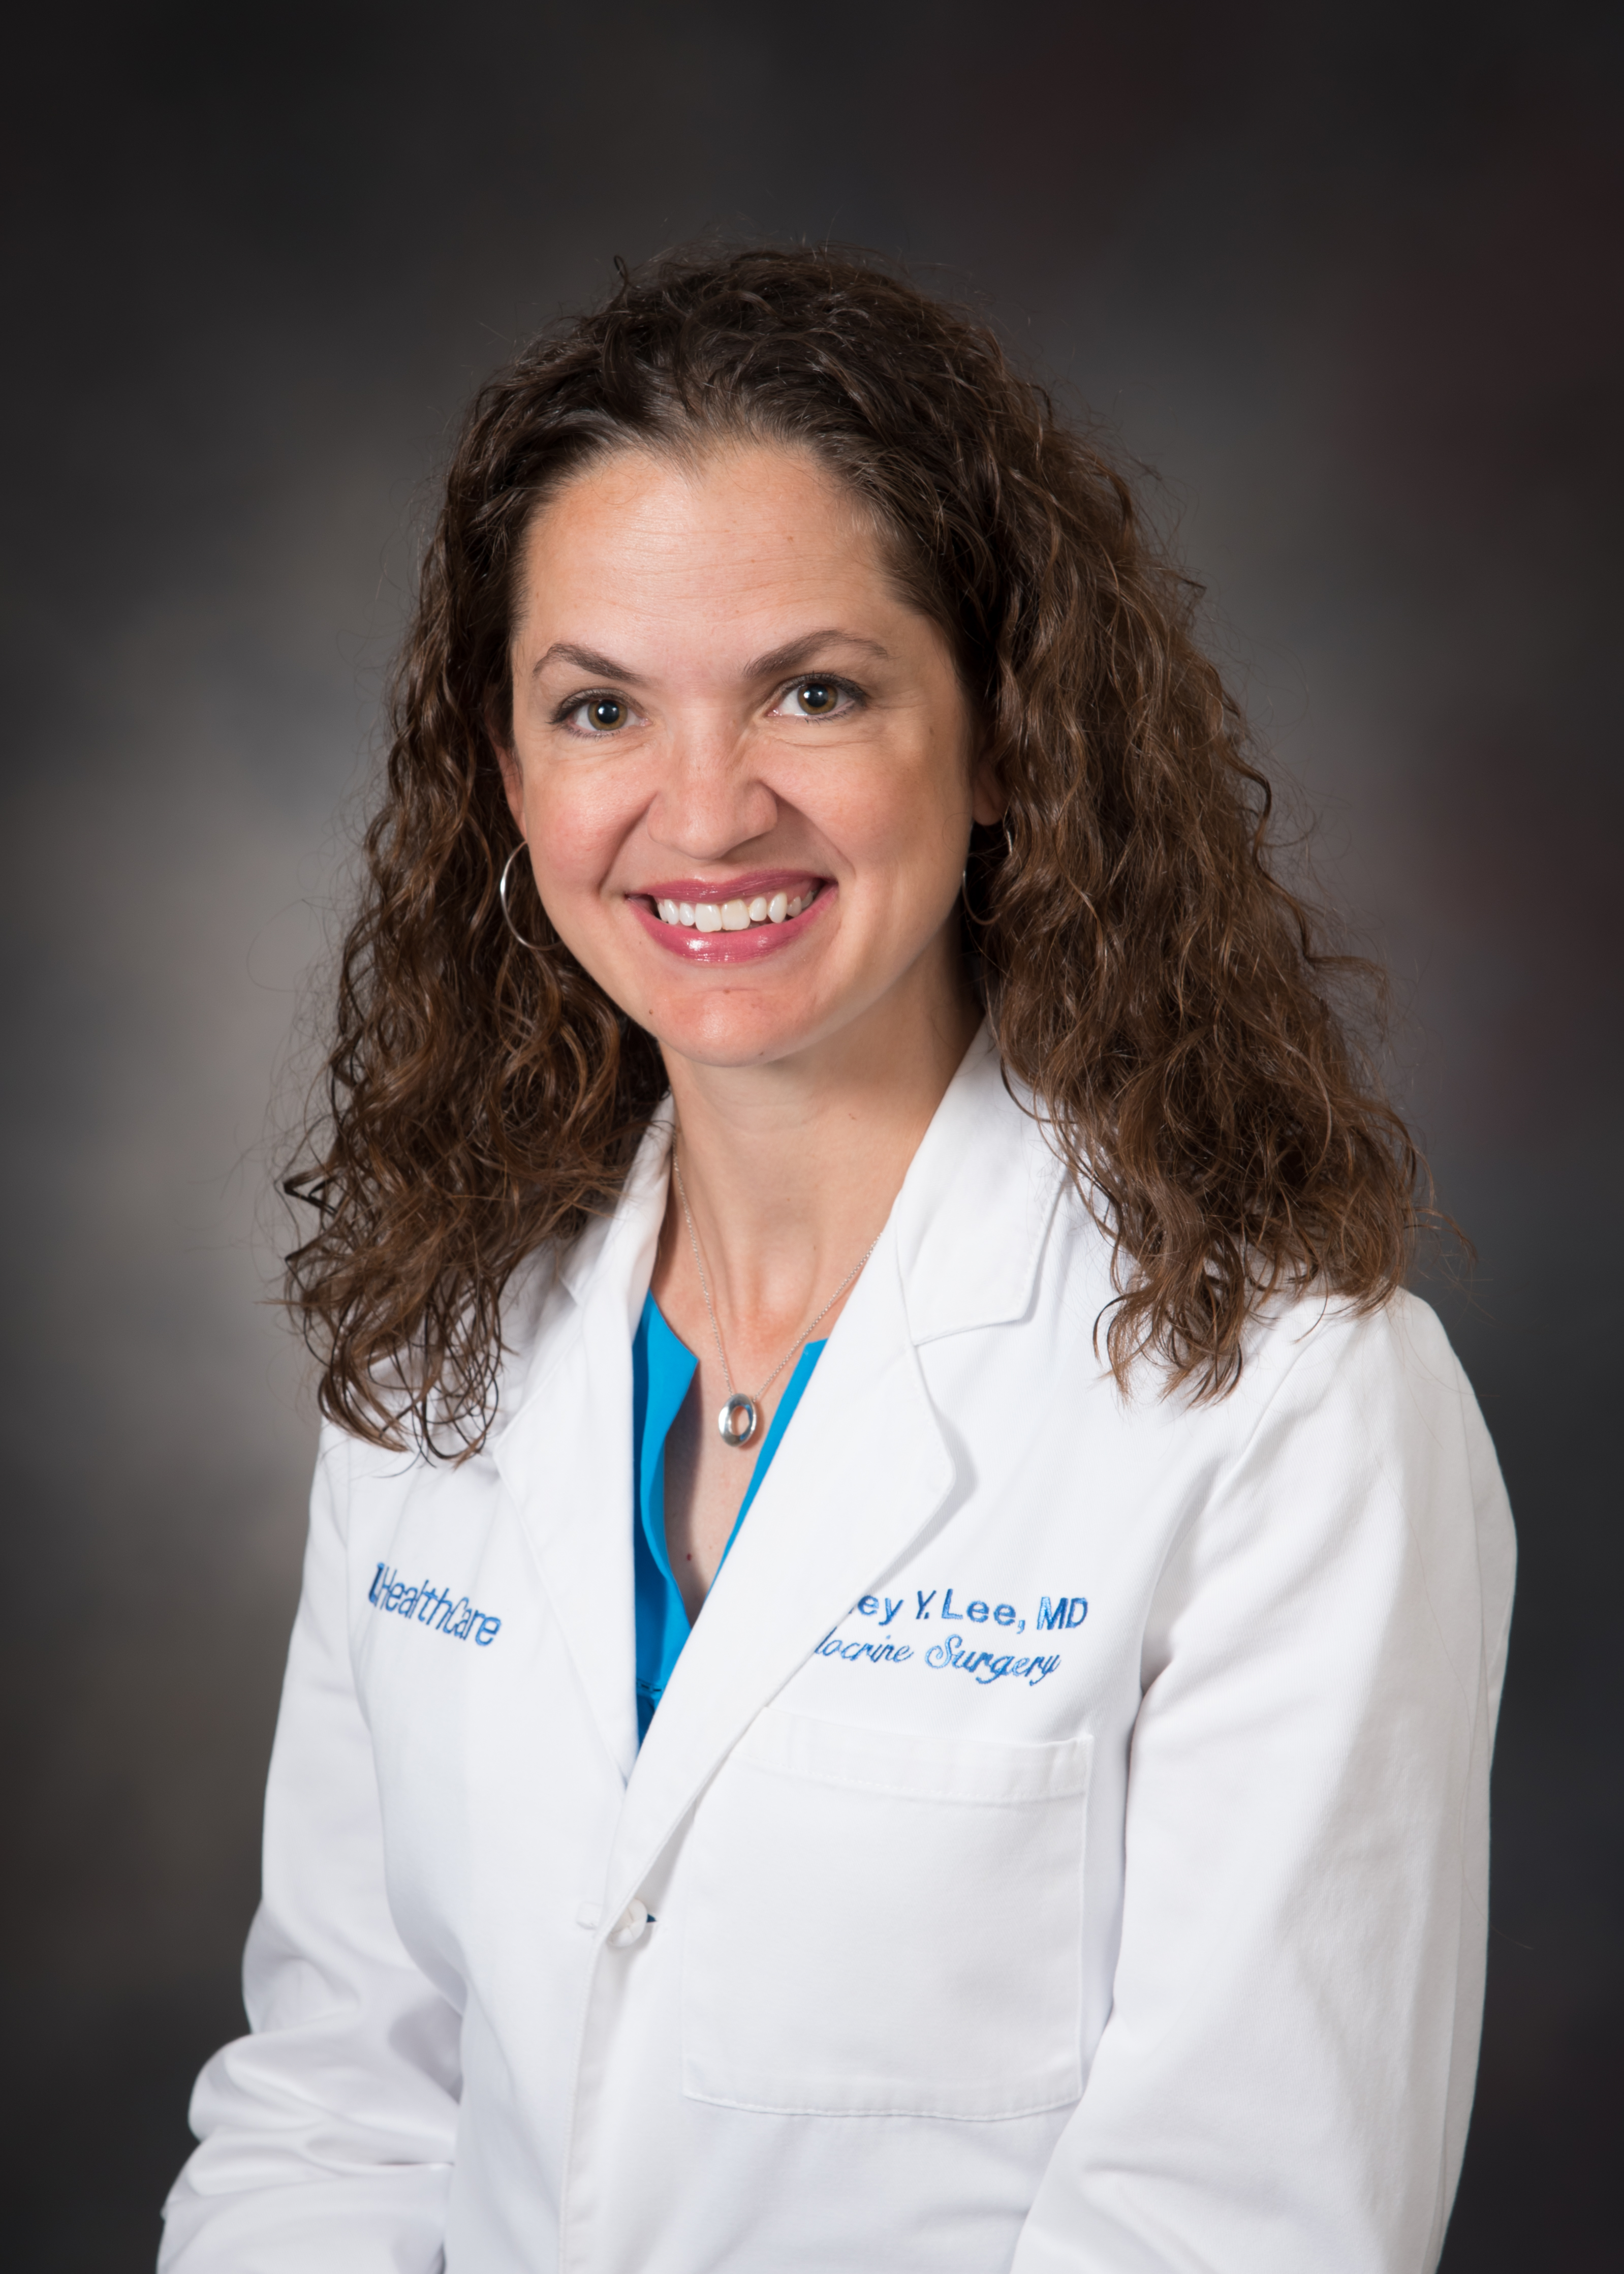 Cortney Lee, MD named the new program director of general surgery residency at UK